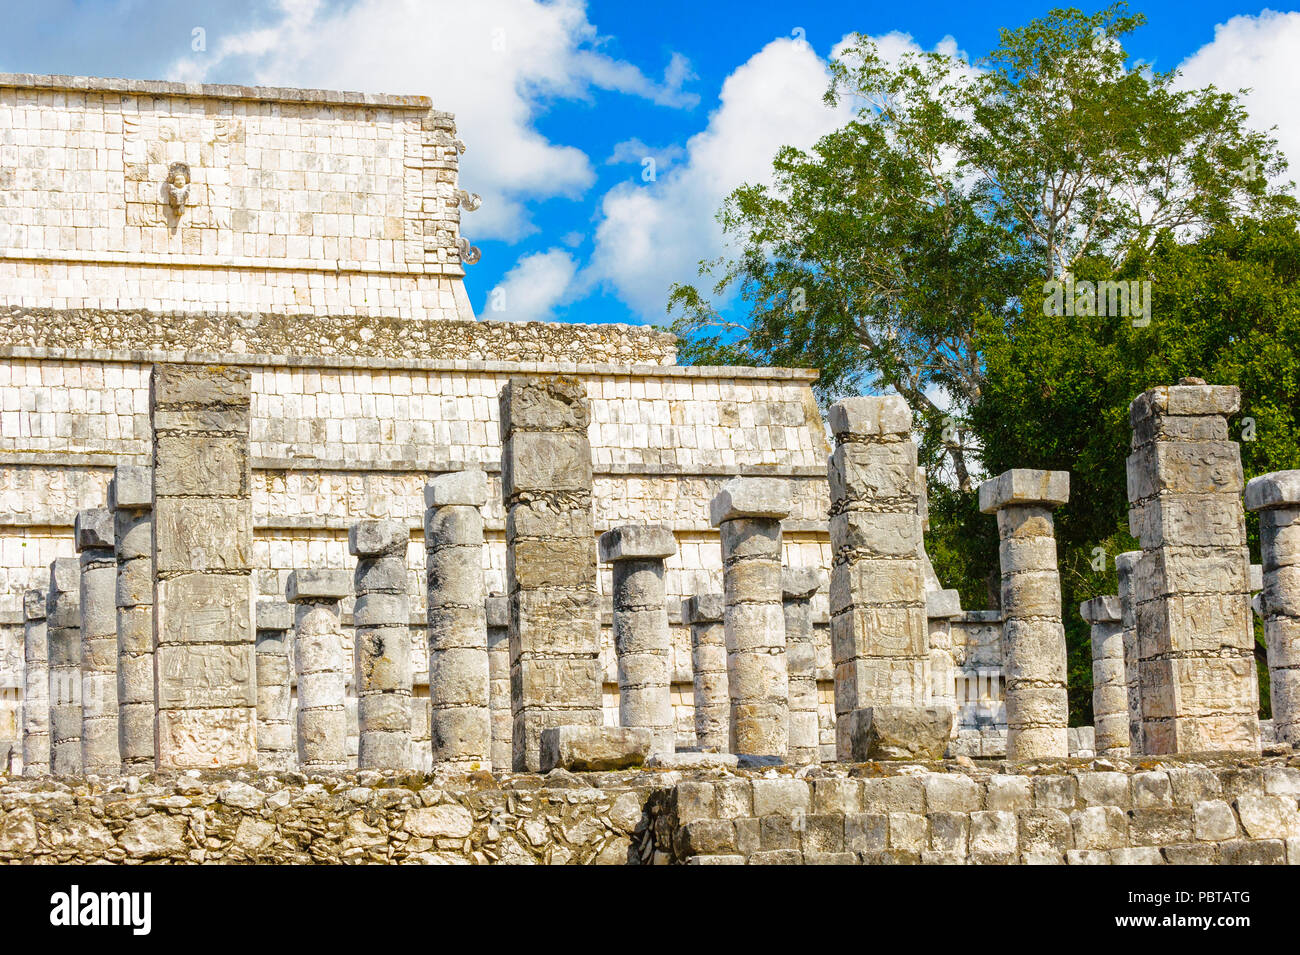 Maya architecture of Chichen Itza, a large pre-Columbian city built by the Maya civilization. Mexico Stock Photo